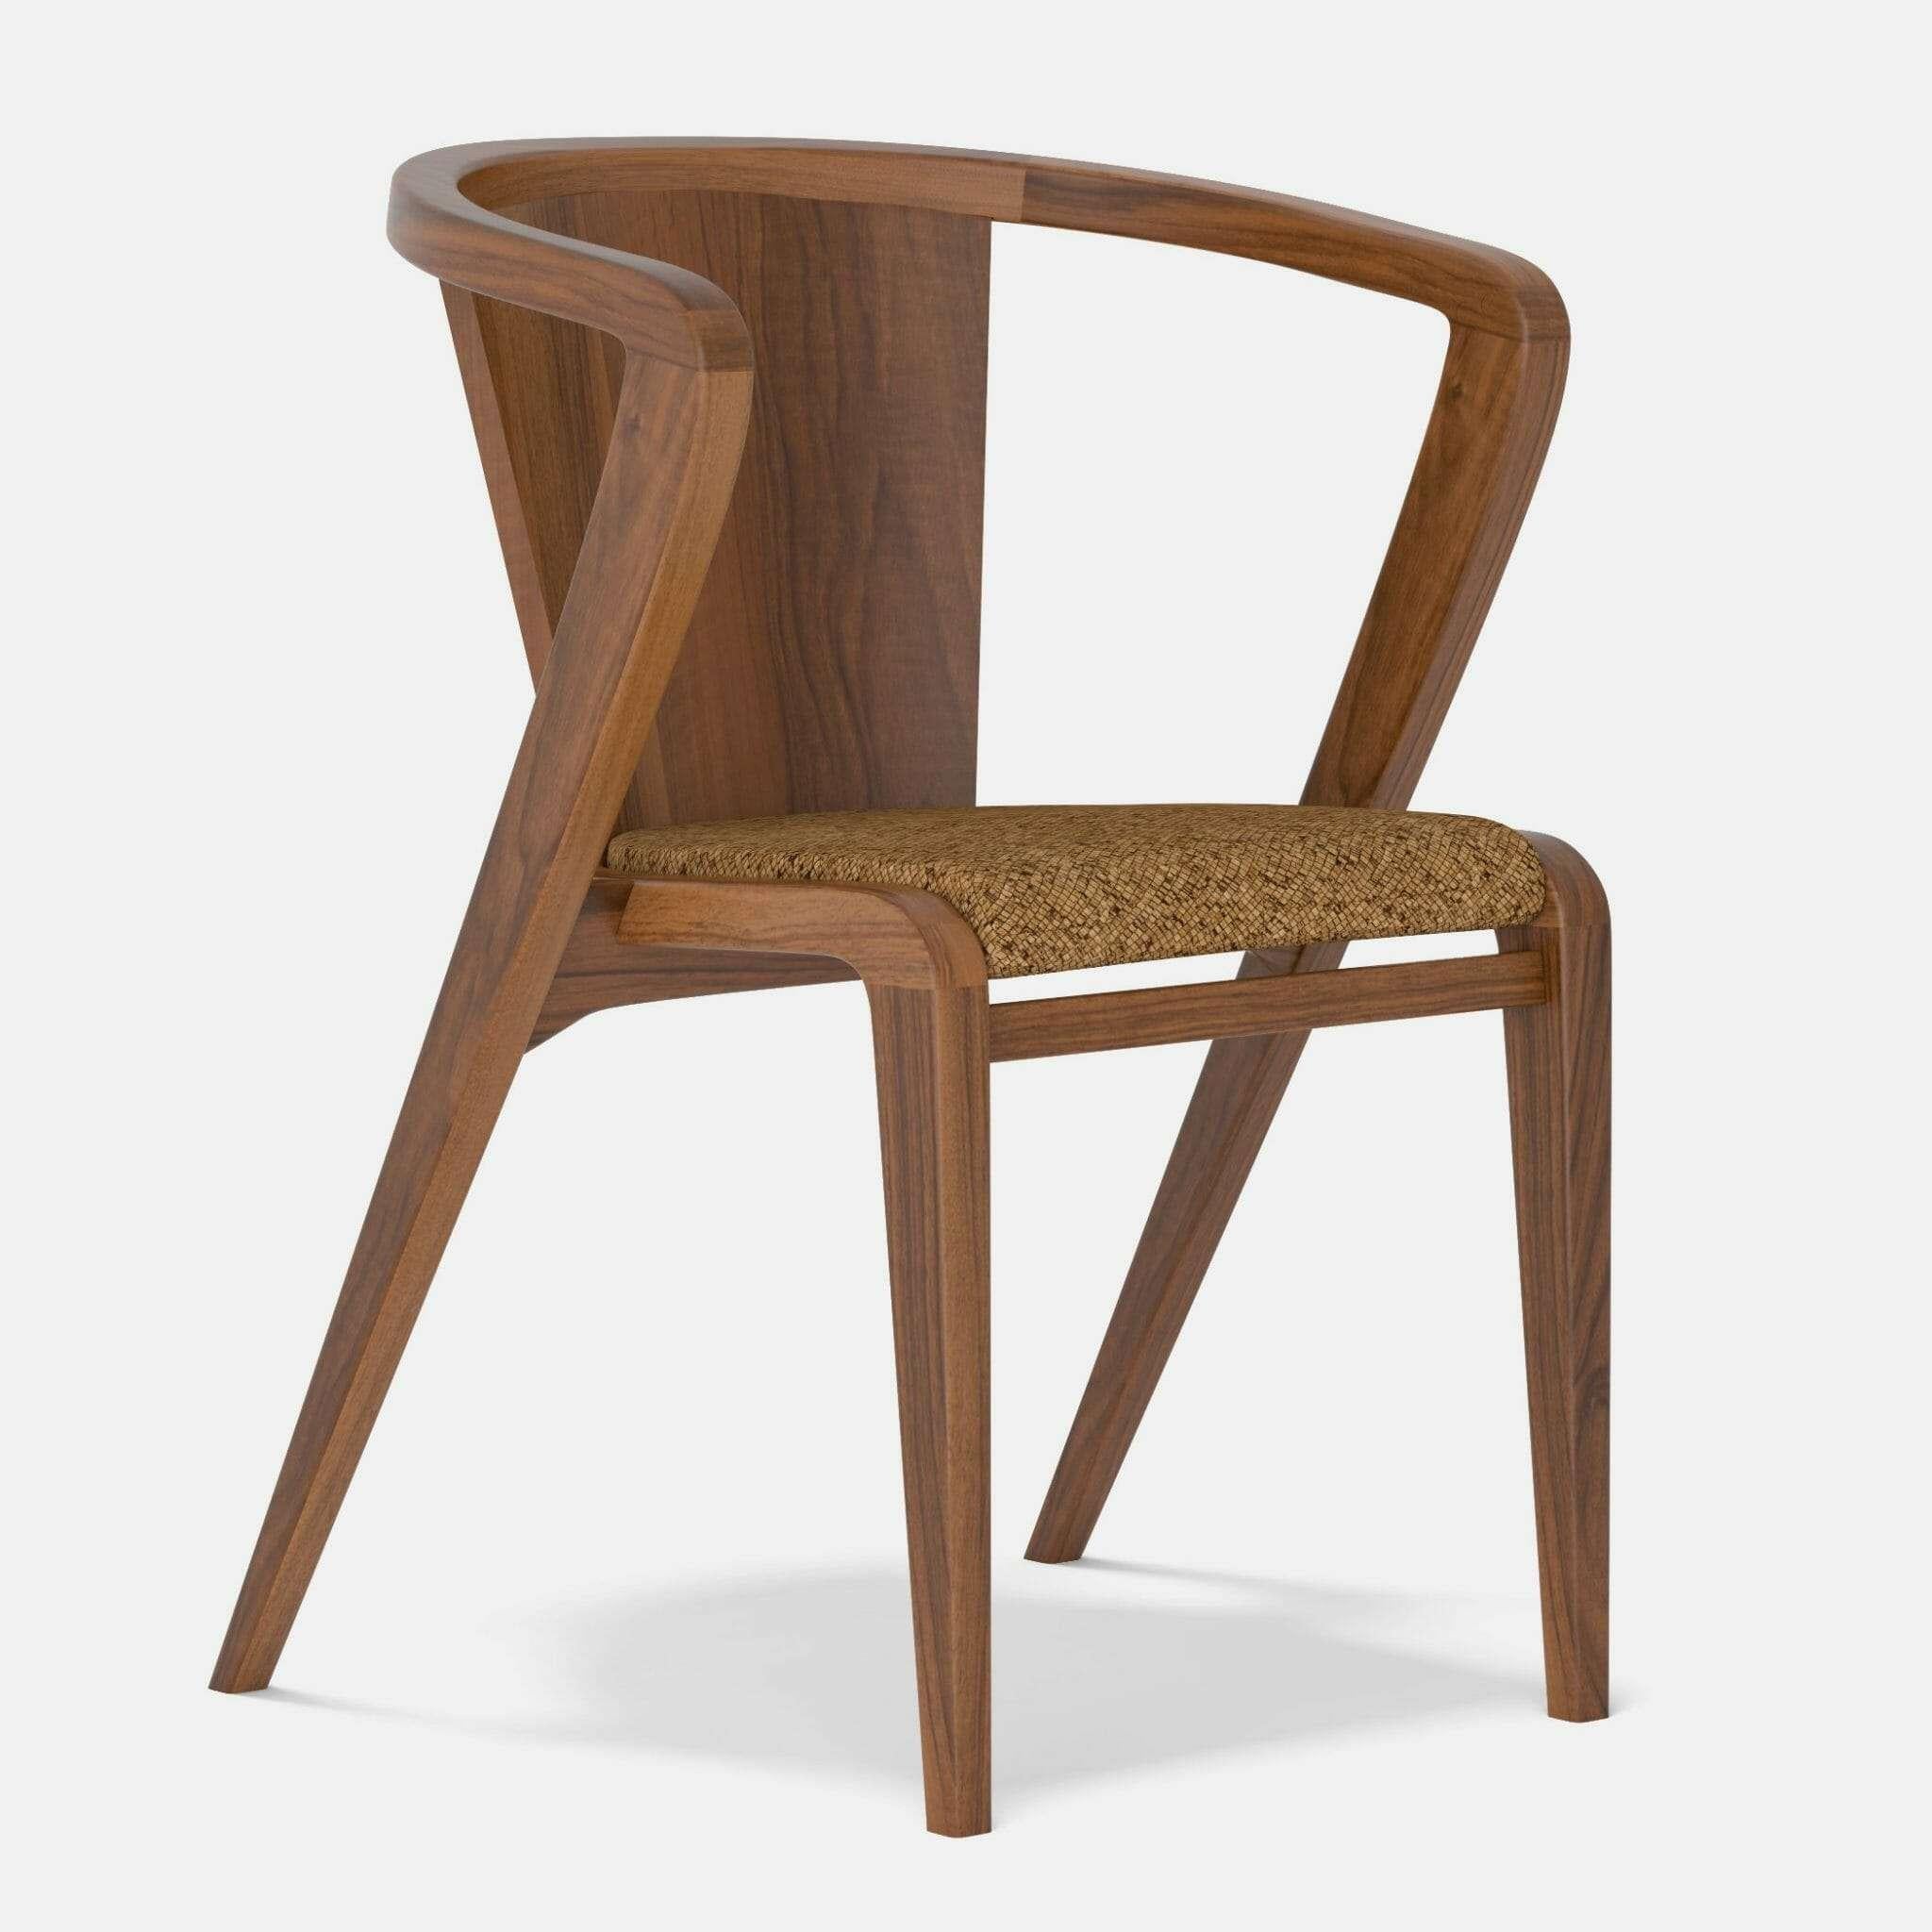 Walnut and fabric Portuguese roots chair by Alexandre Caldas
Dimensions: W 40 x D 39 x H 73 cm
Materials: Walnut, fabric

Seat Available in Fabric, velvet, natural leather.

Portuguese roots chair, was inspired by its original model from 1950,